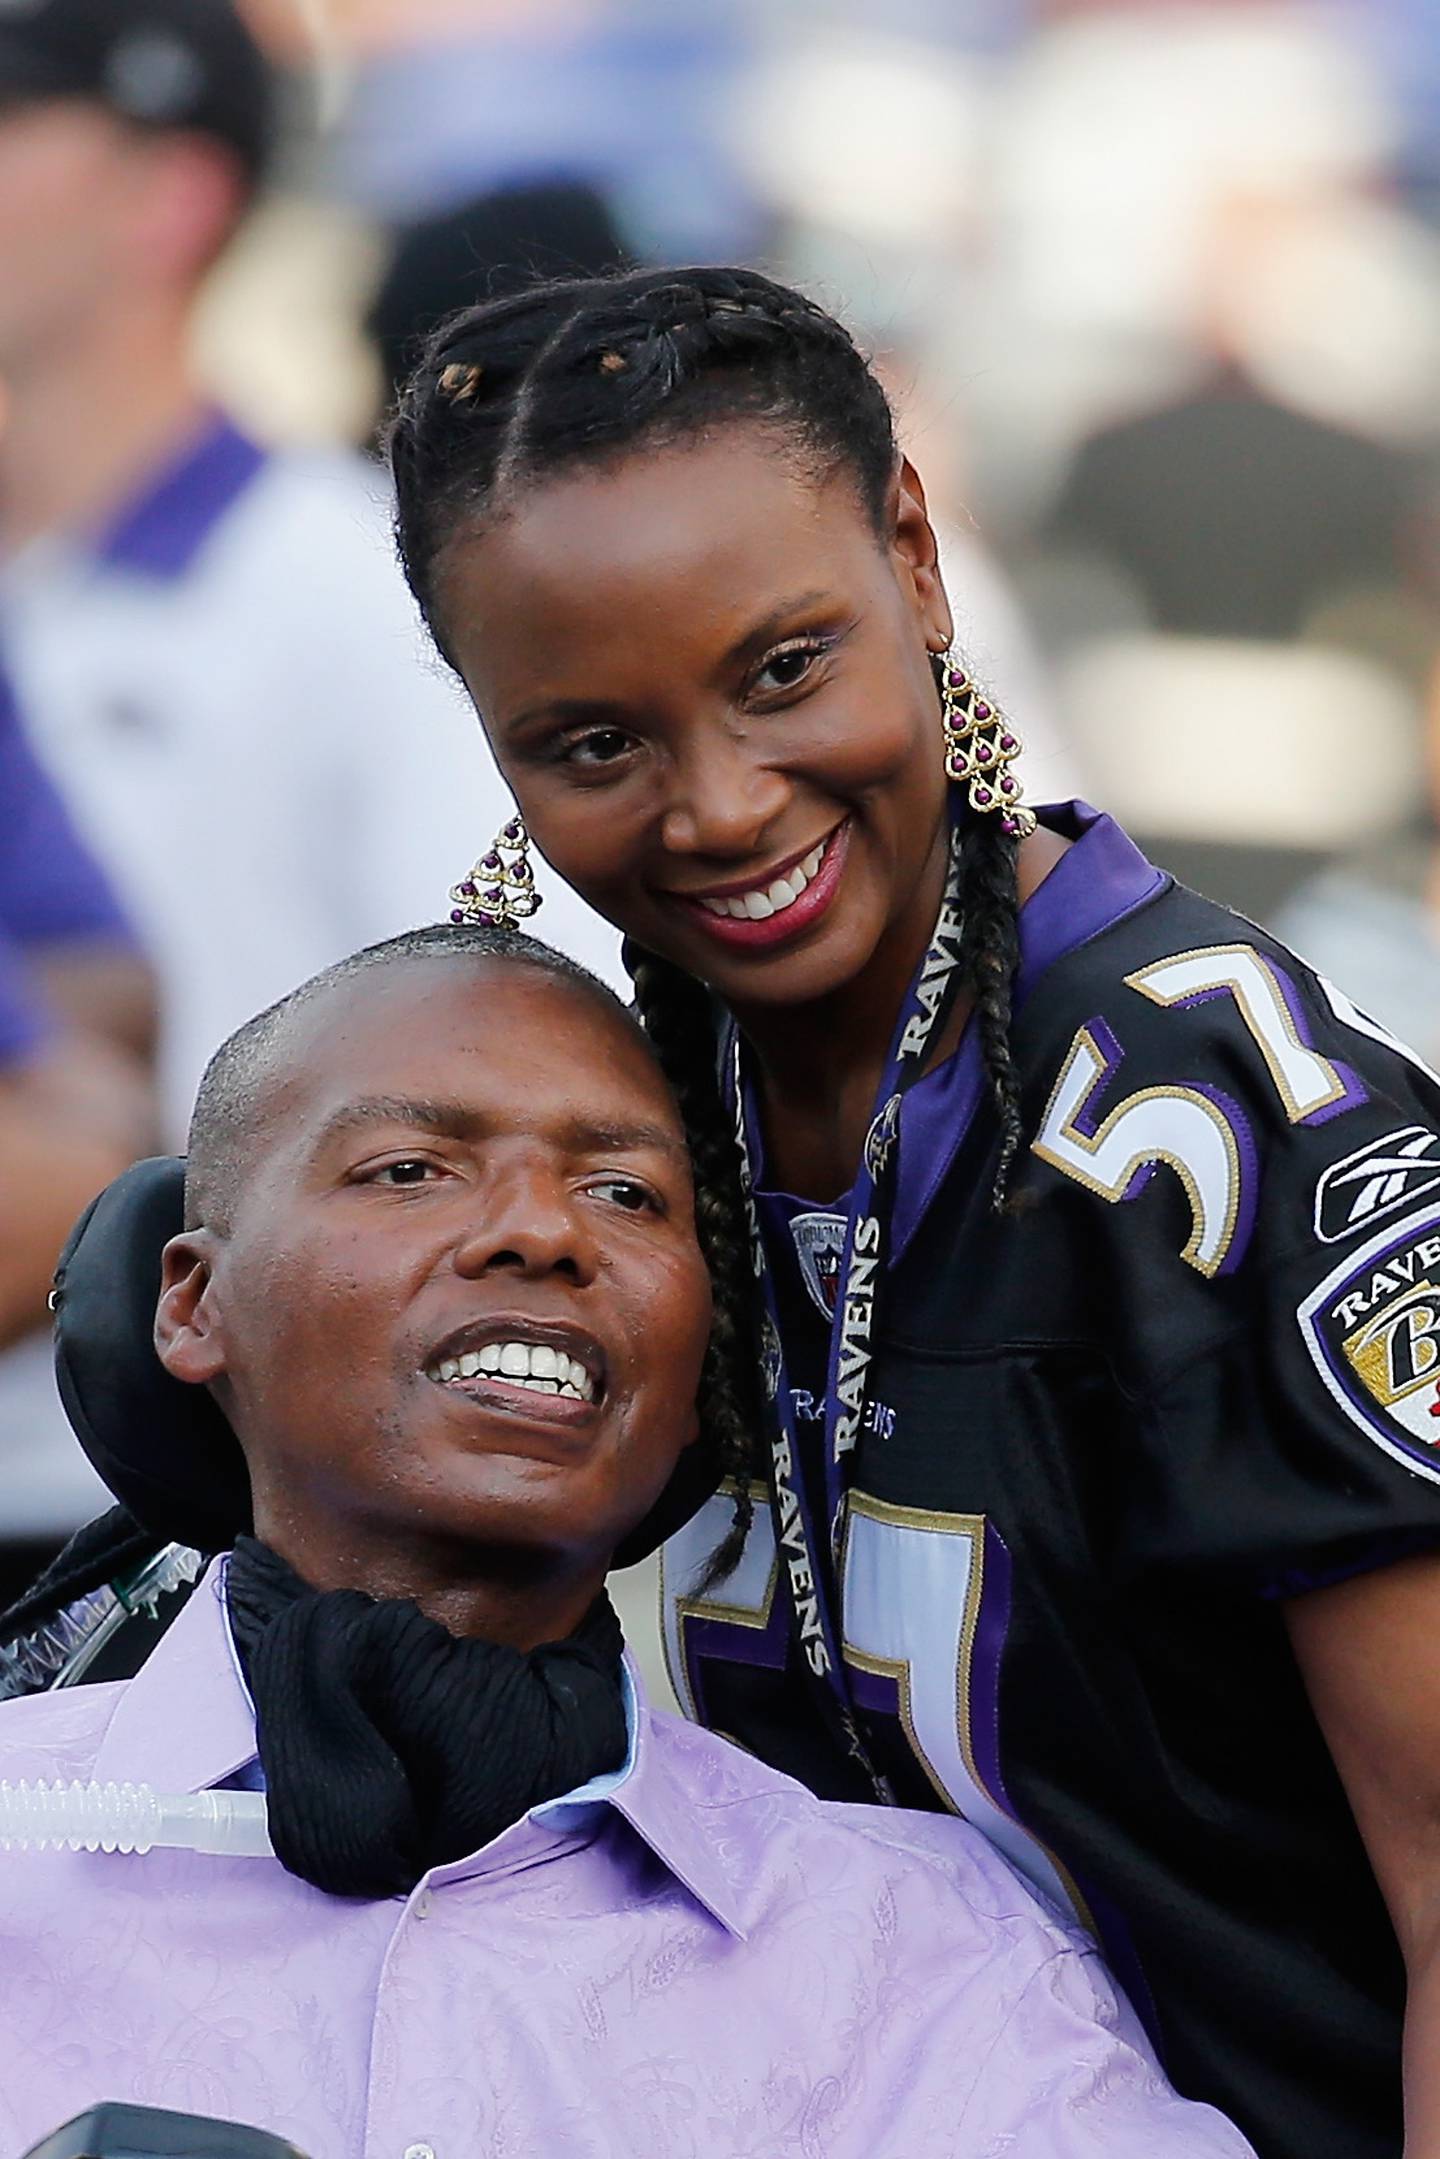 BALTIMORE, MD - AUGUST 13: Former Baltimore Ravens player O.J. Brigance and his wife Chanda pose for a photo before the start of a preseason game between the Ravens and New Orleans Saints at M&T Bank Stadium on August 13, 2015 in Baltimore, Maryland.  (Photo by Rob Carr/Getty Images)